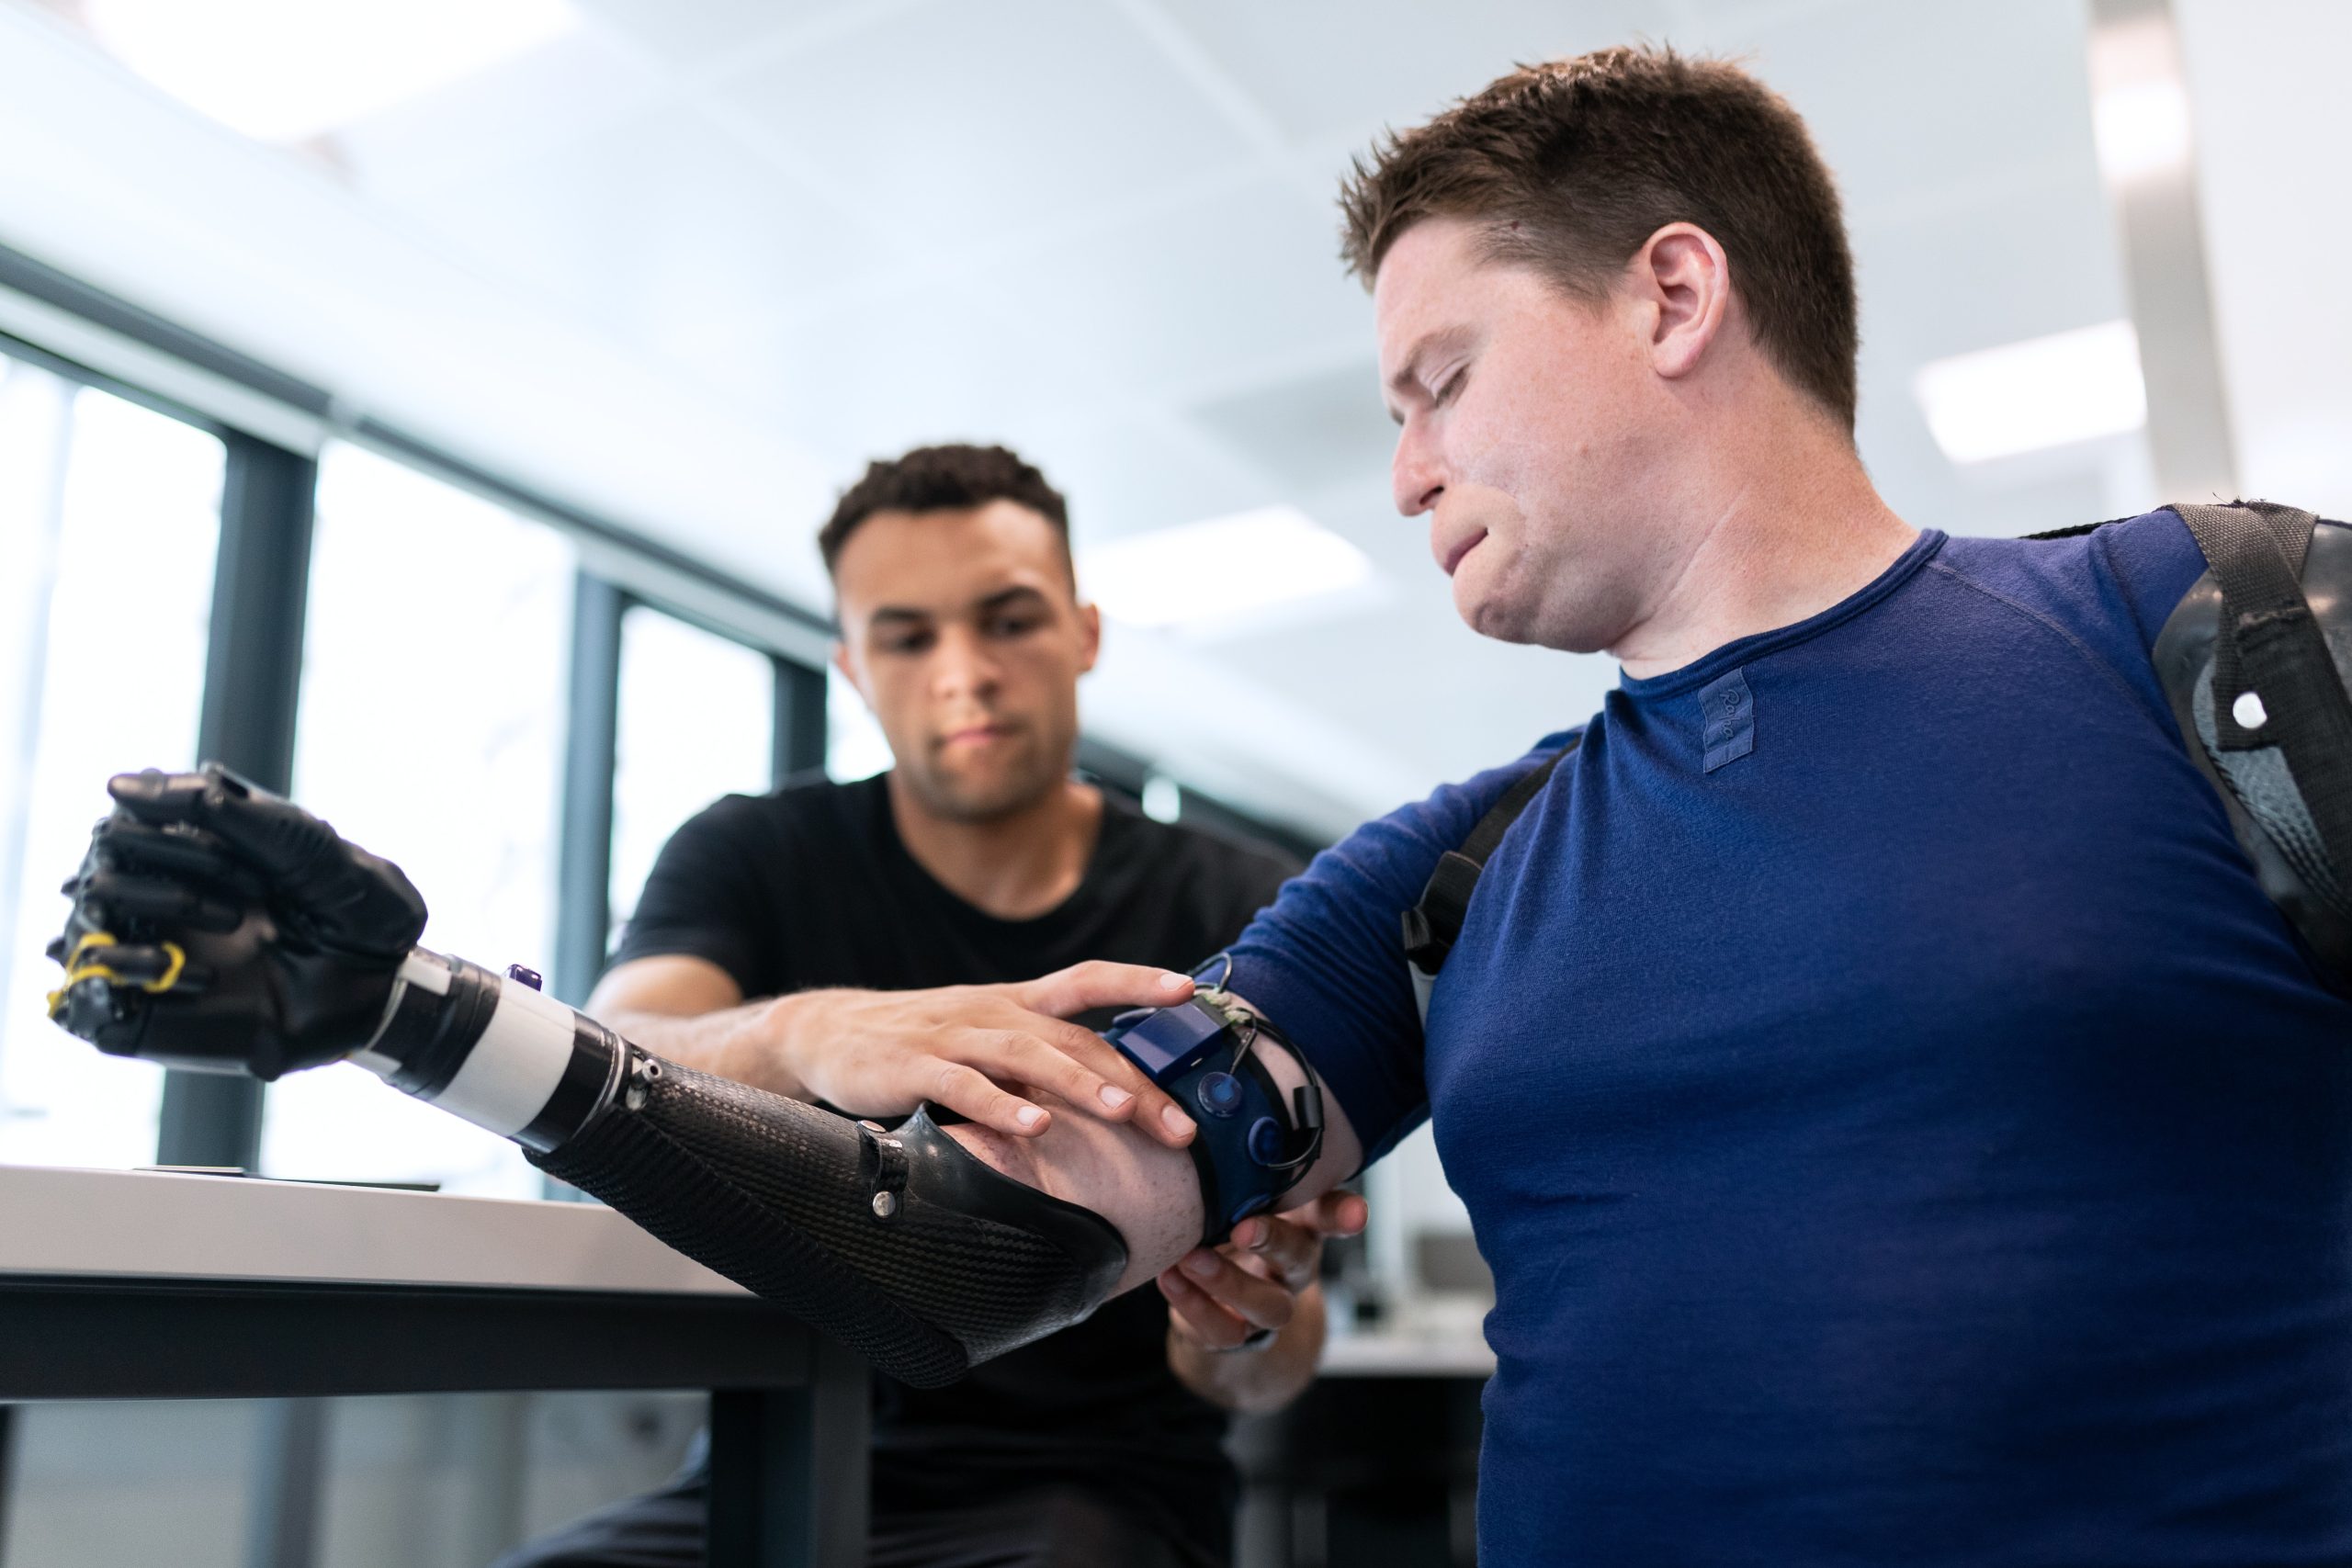 A technician fits a man with a prosthetic arm